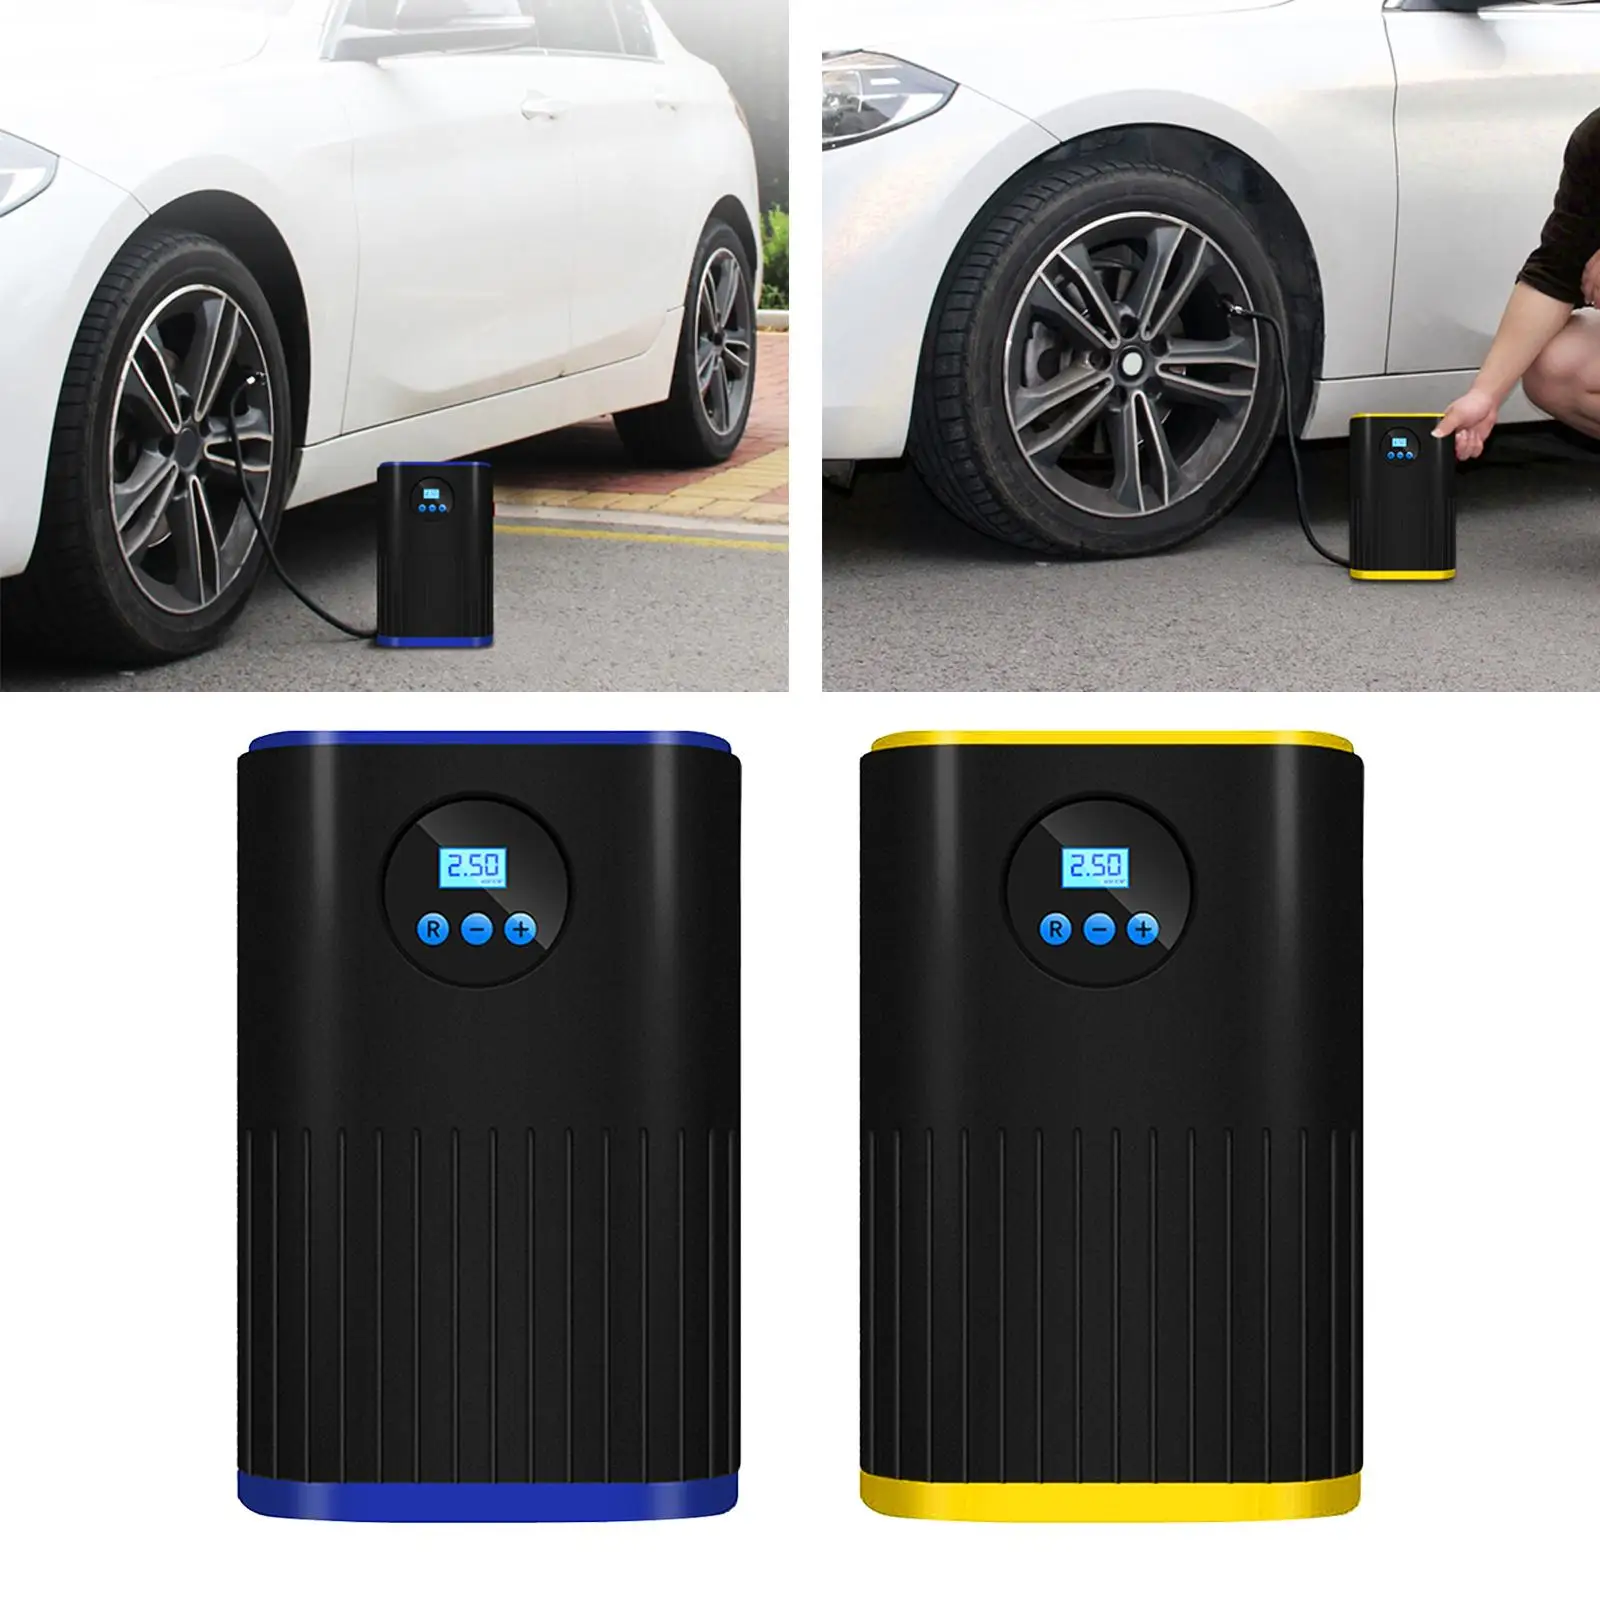 Portable Air Compressor Tire Inflator Electric 12V DC Emergency LED Flashlight Pressure Air Pump Fits for Bicycle Motorcycles